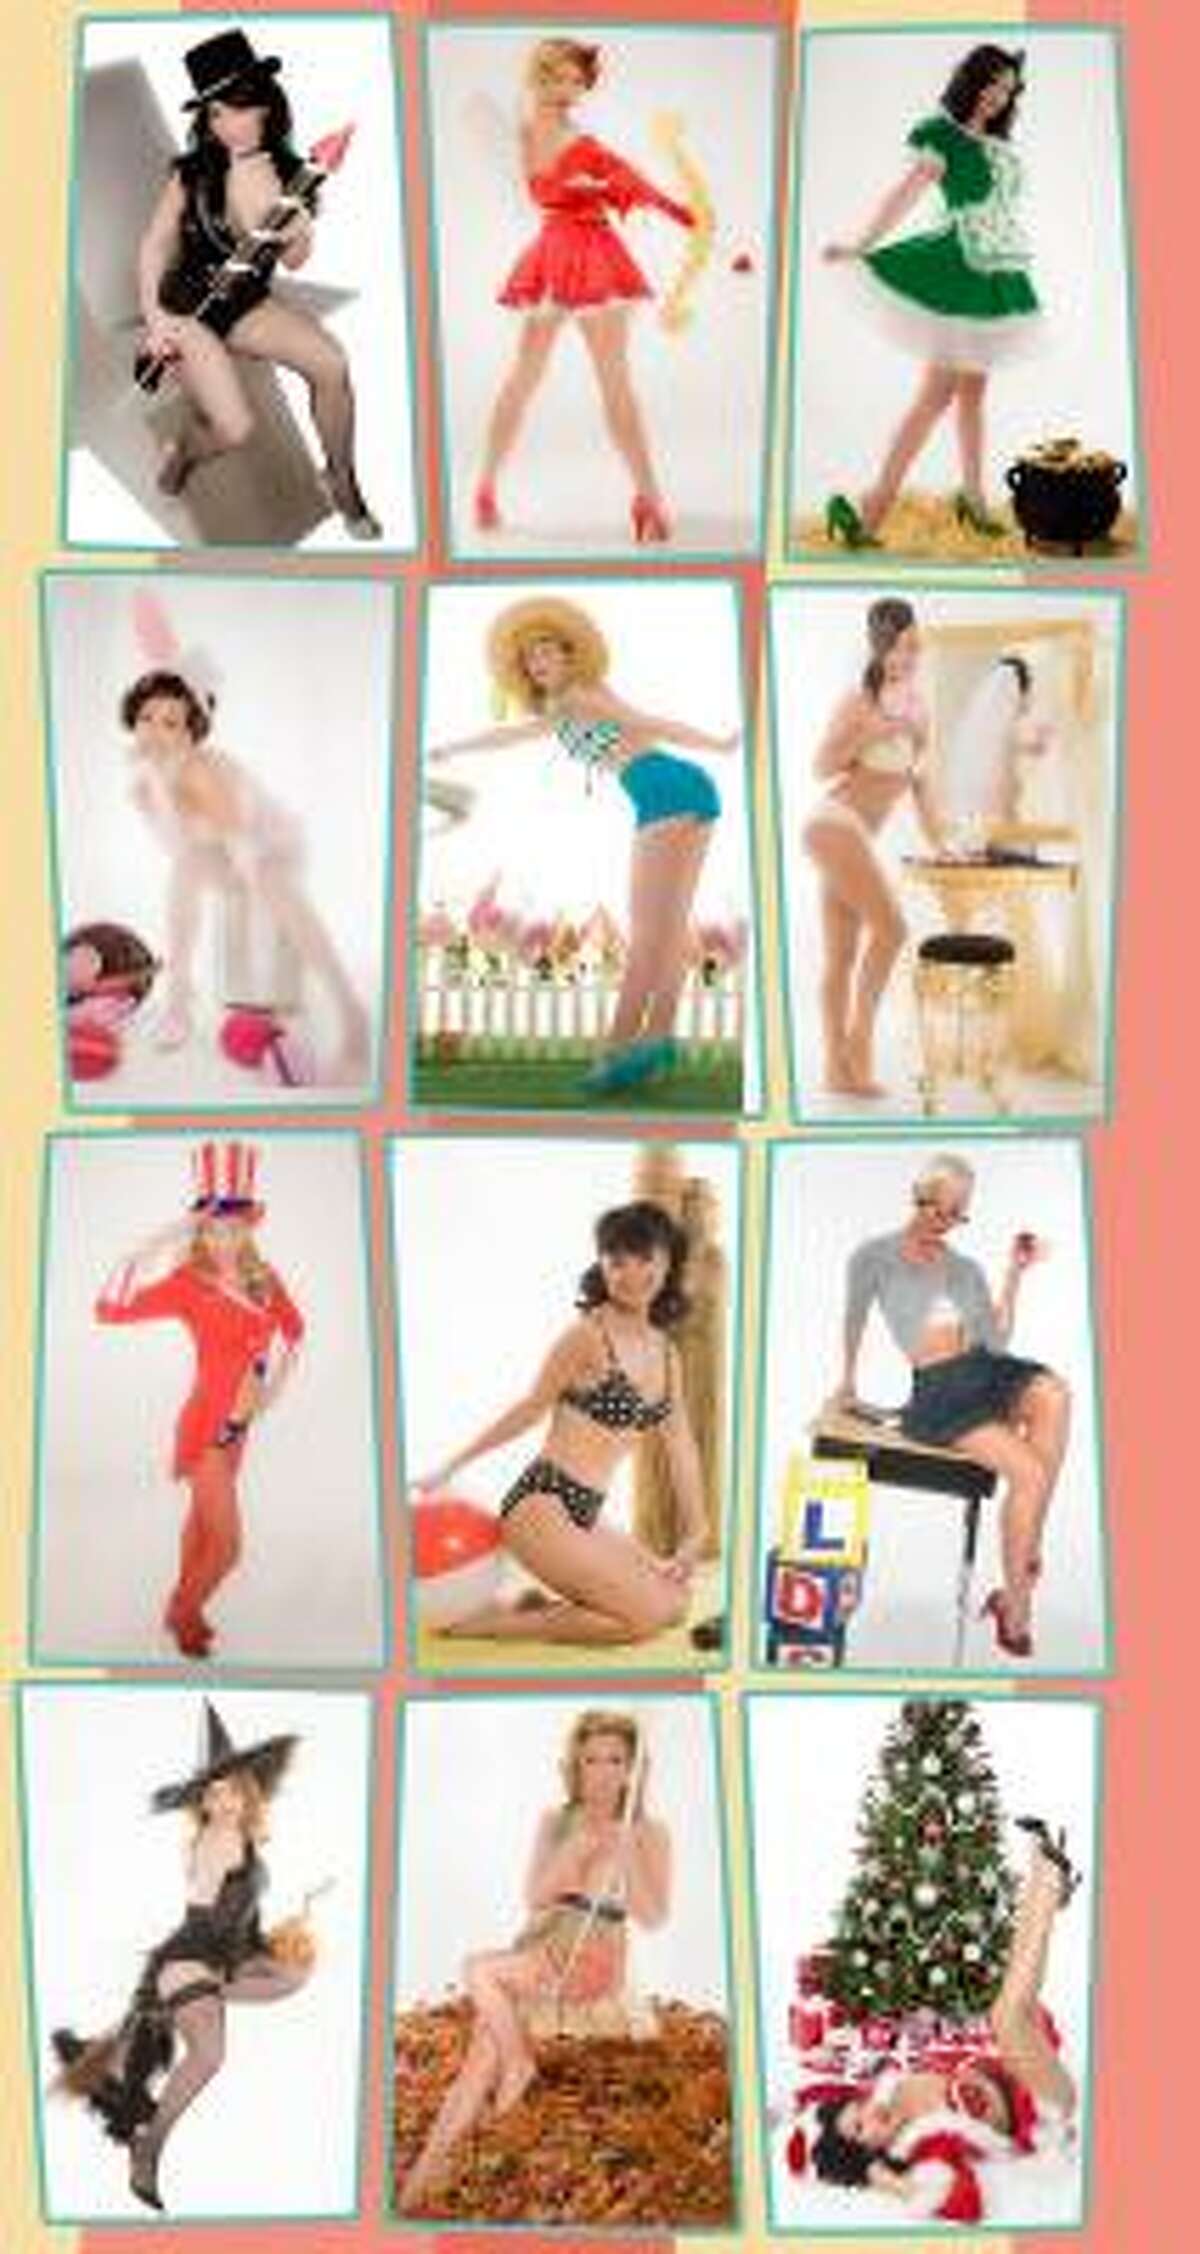 This photo released by CMH Entertainment shows part of the back cover of the 2010 "Hot Mormon Muffins: A Taste of Motherhood" calendar which features 12 mothers who claim membership in The Church of Jesus Christ of Latter-day Saints in vintage pinup picture poses. Each month also has a muffin recipe. The latest installment of the calendar series that pokes fun at Mormon stereotypes is putting a twist on motherhood.